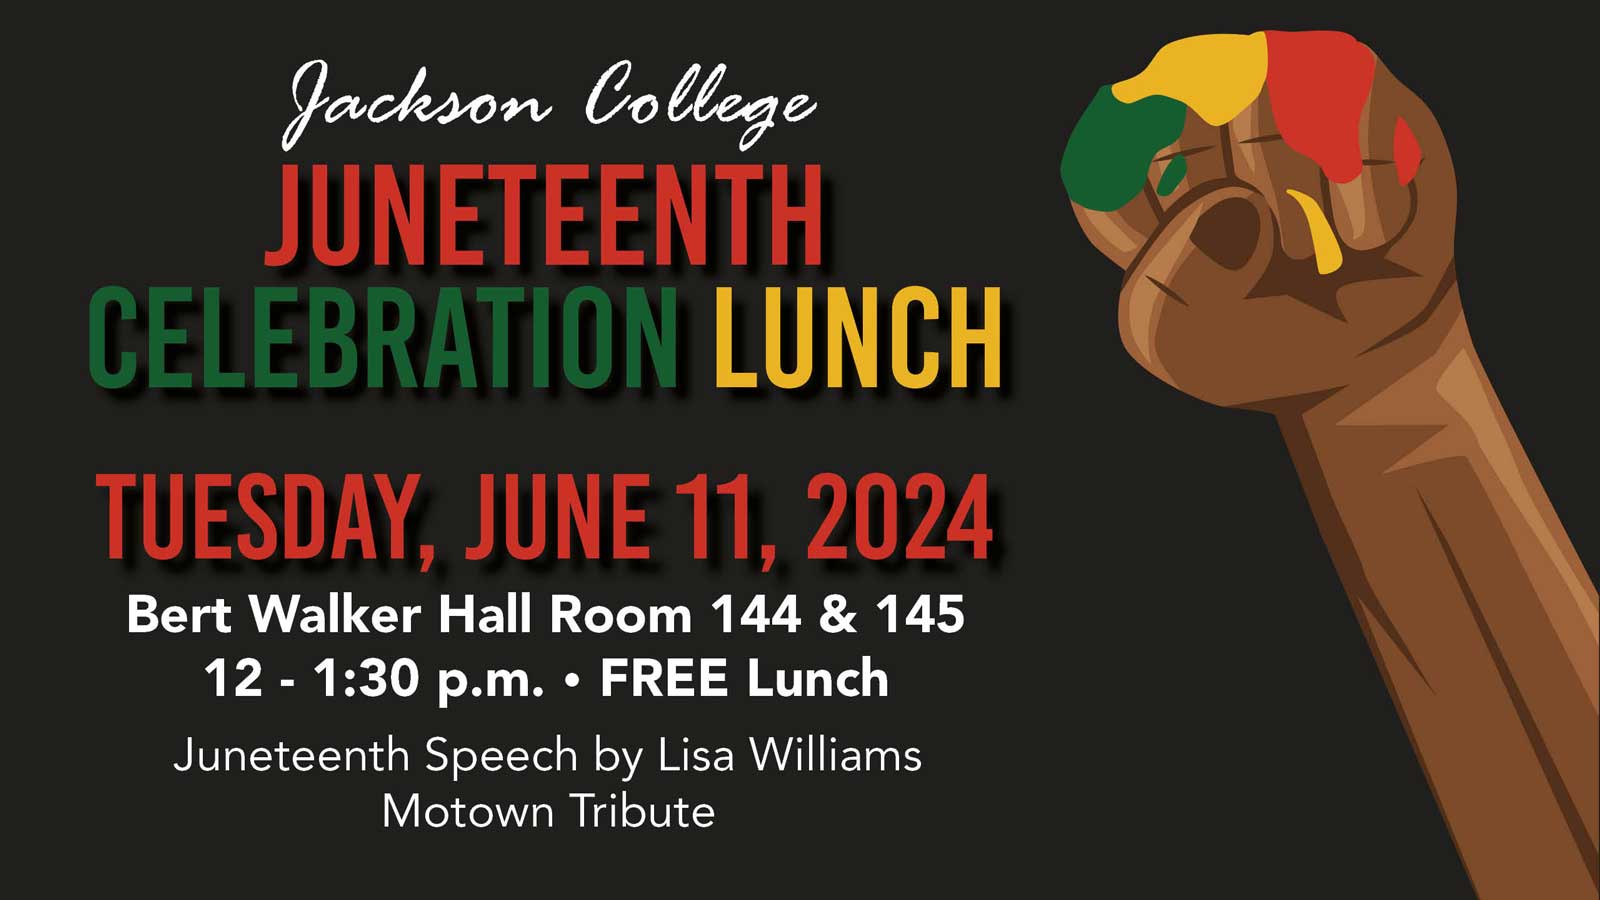 Jackson College hosts Juneteenth Luncheon Tuesday